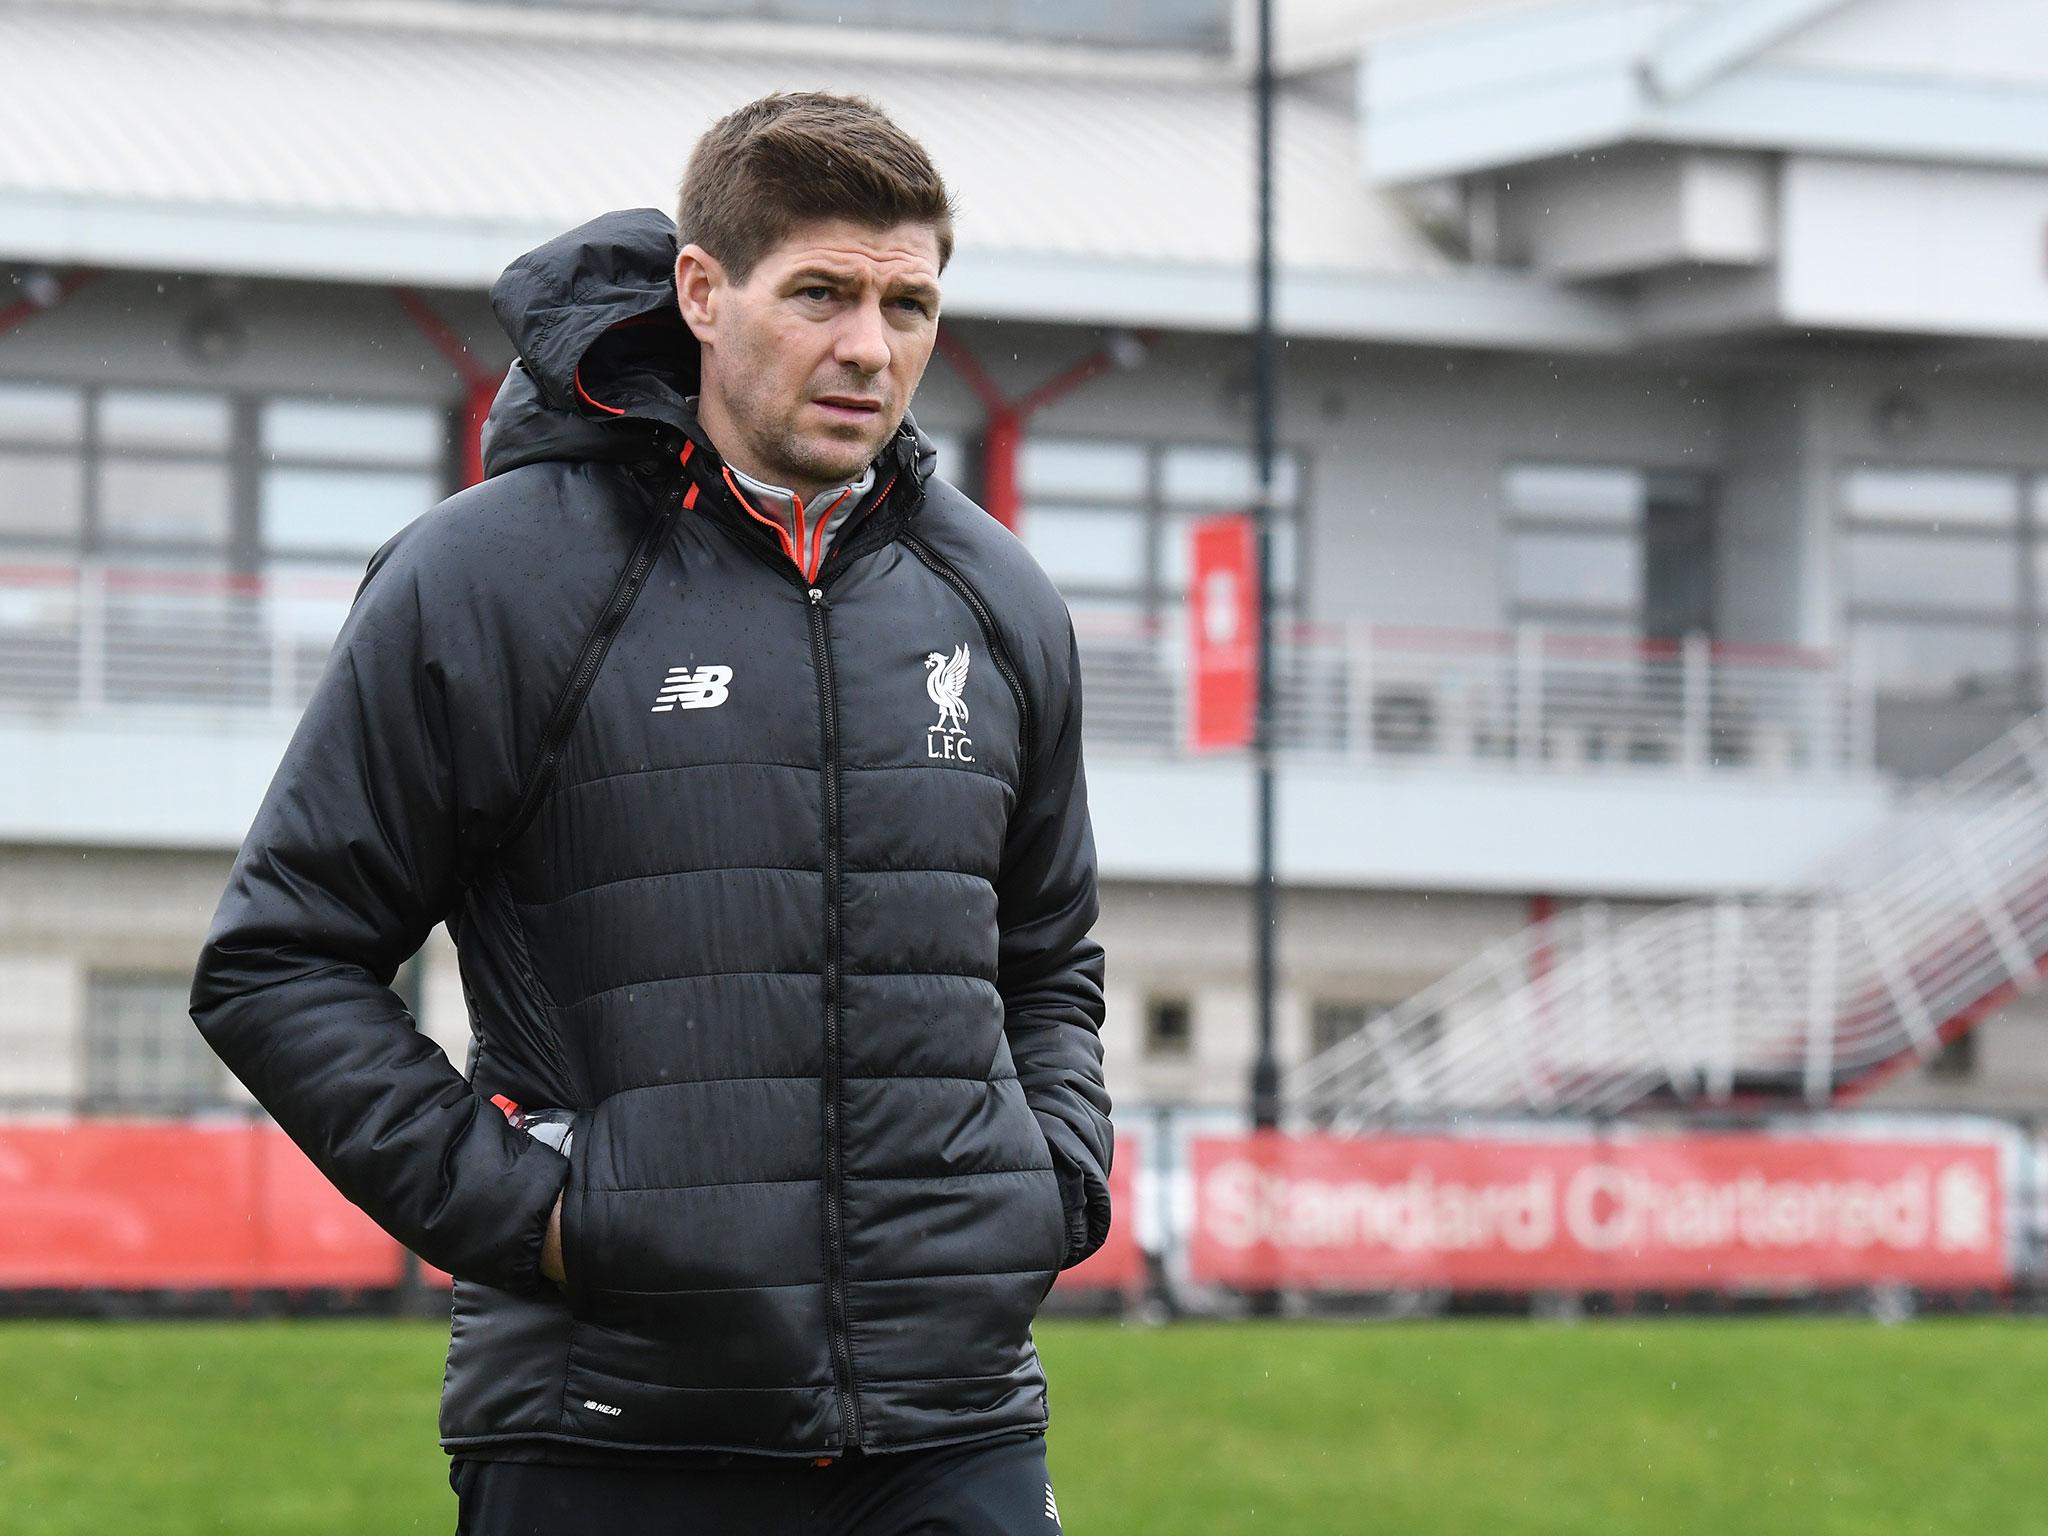 Gerrard has been shadowing a number of coaches across Liverpool's age groups (Getty)